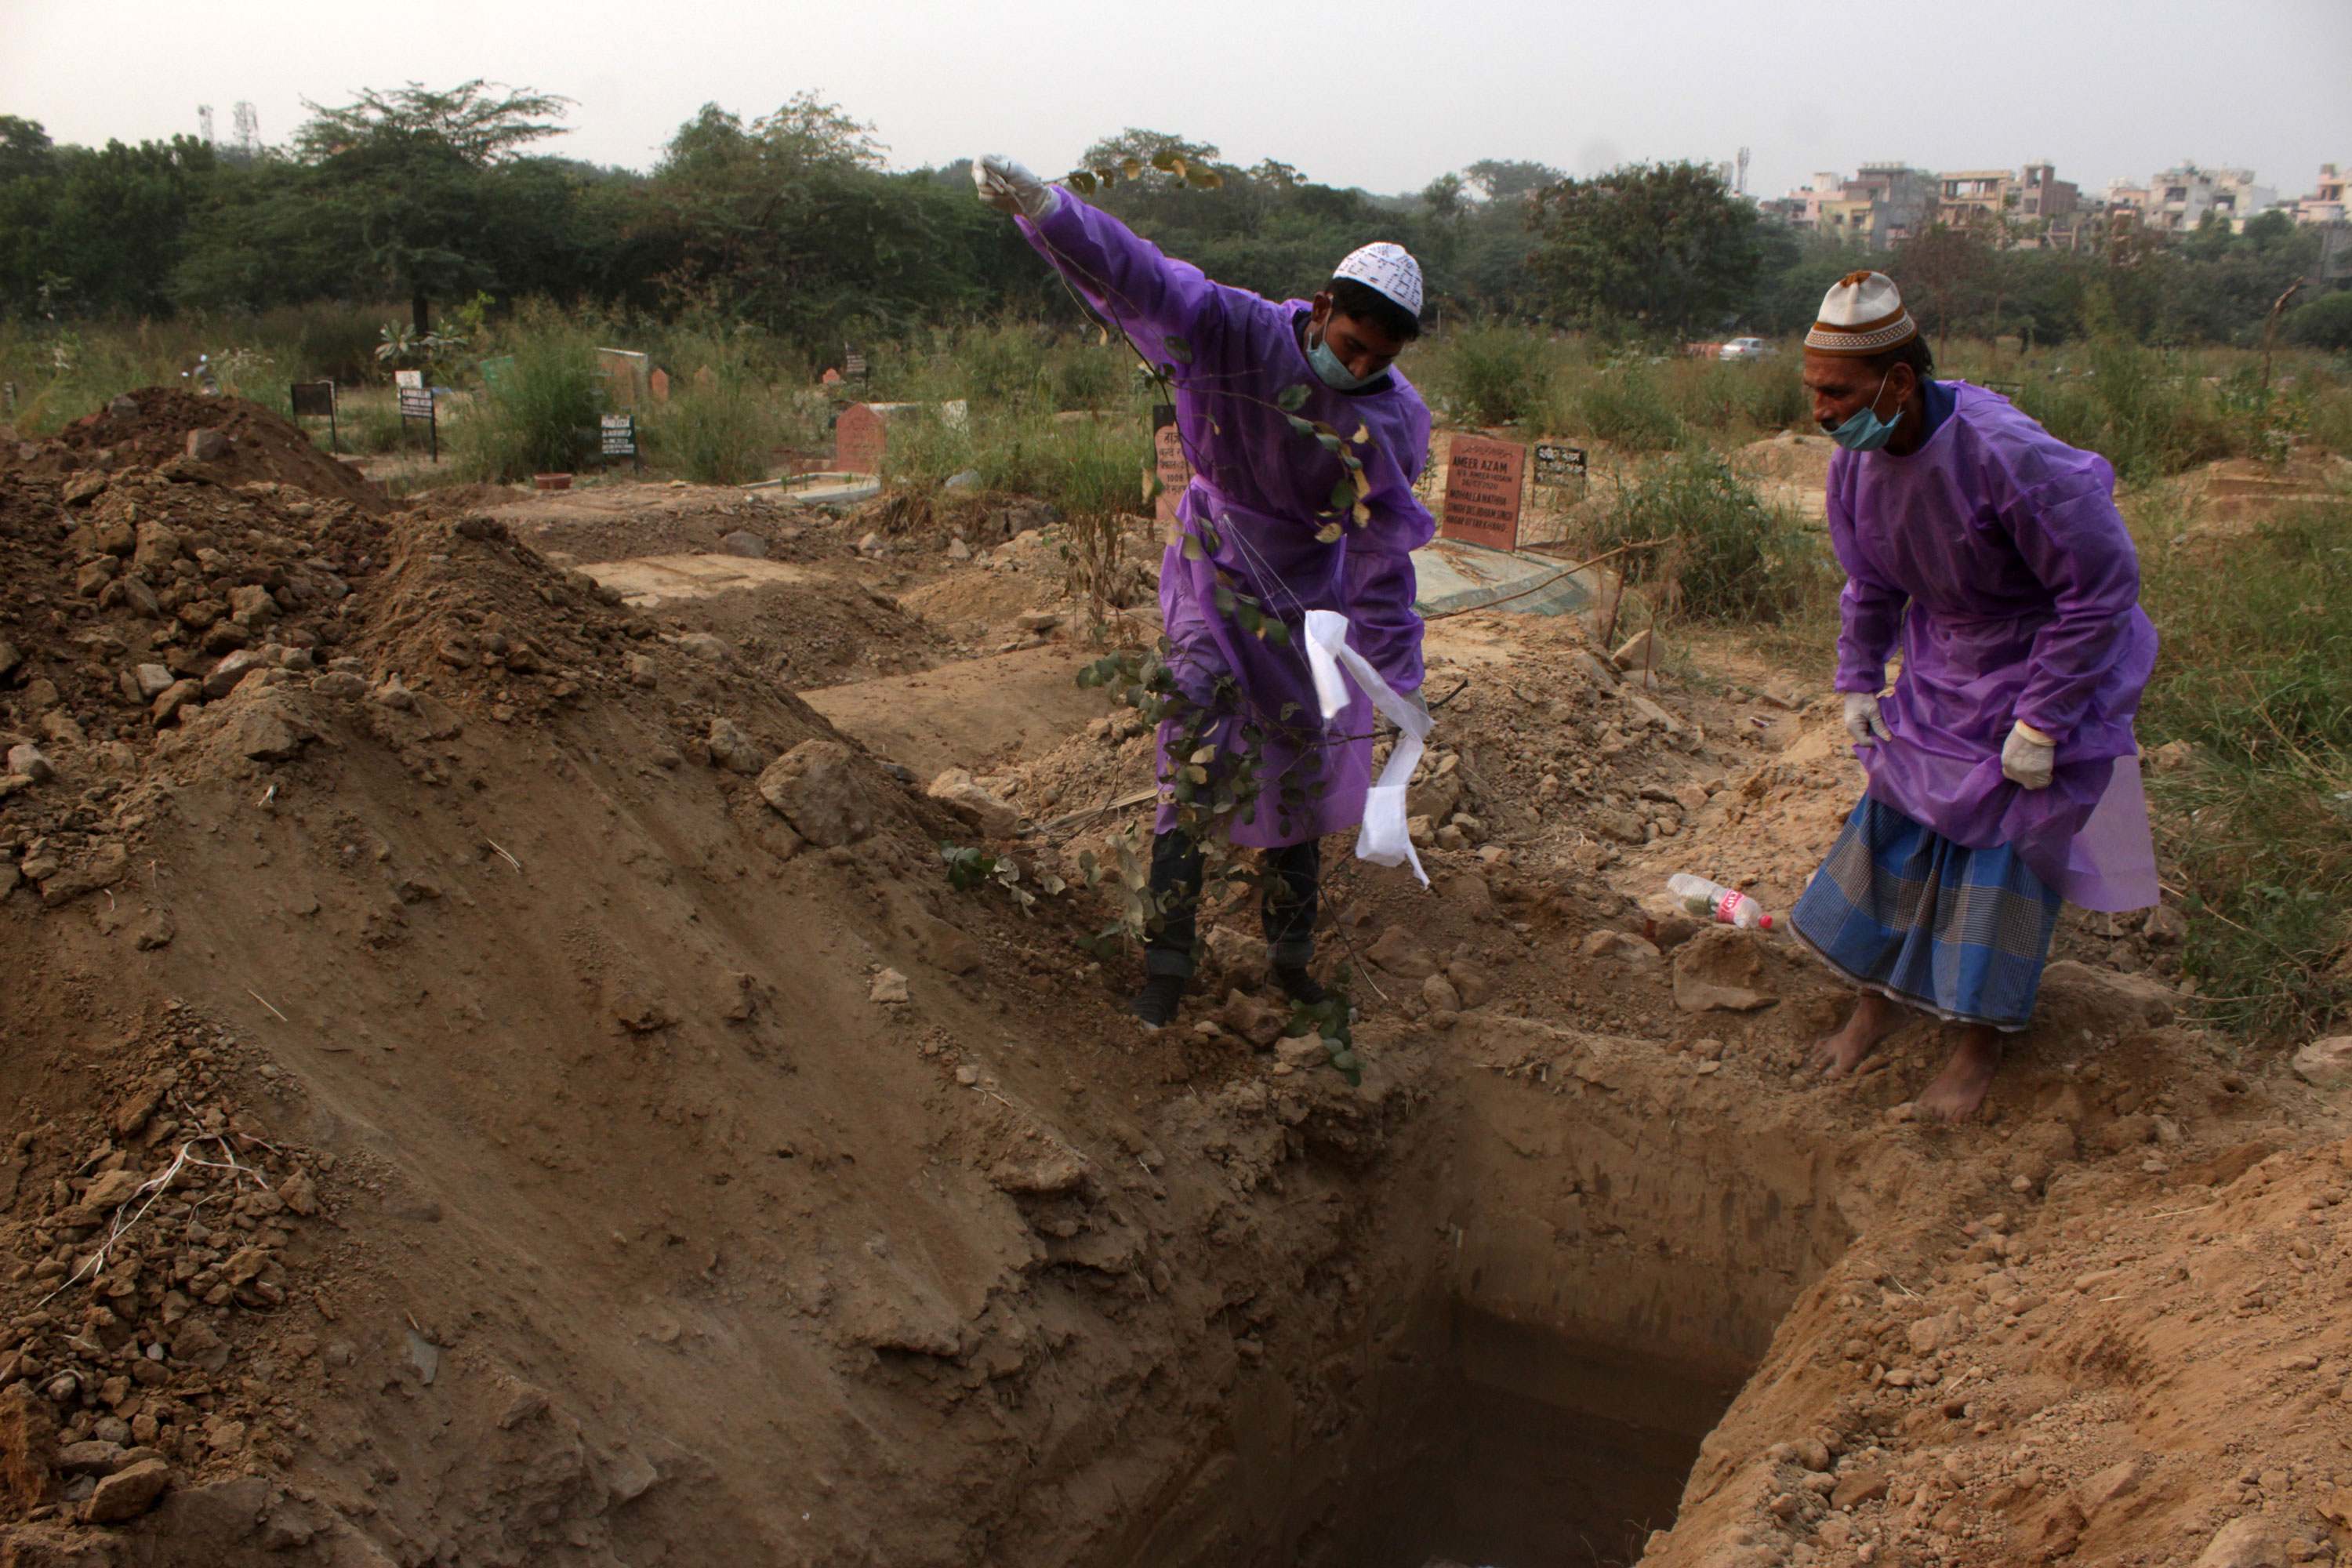 Family members in personal protective equipment perform the burial of a person who died of Covid-19 at a graveyard in New Delhi on November 12.